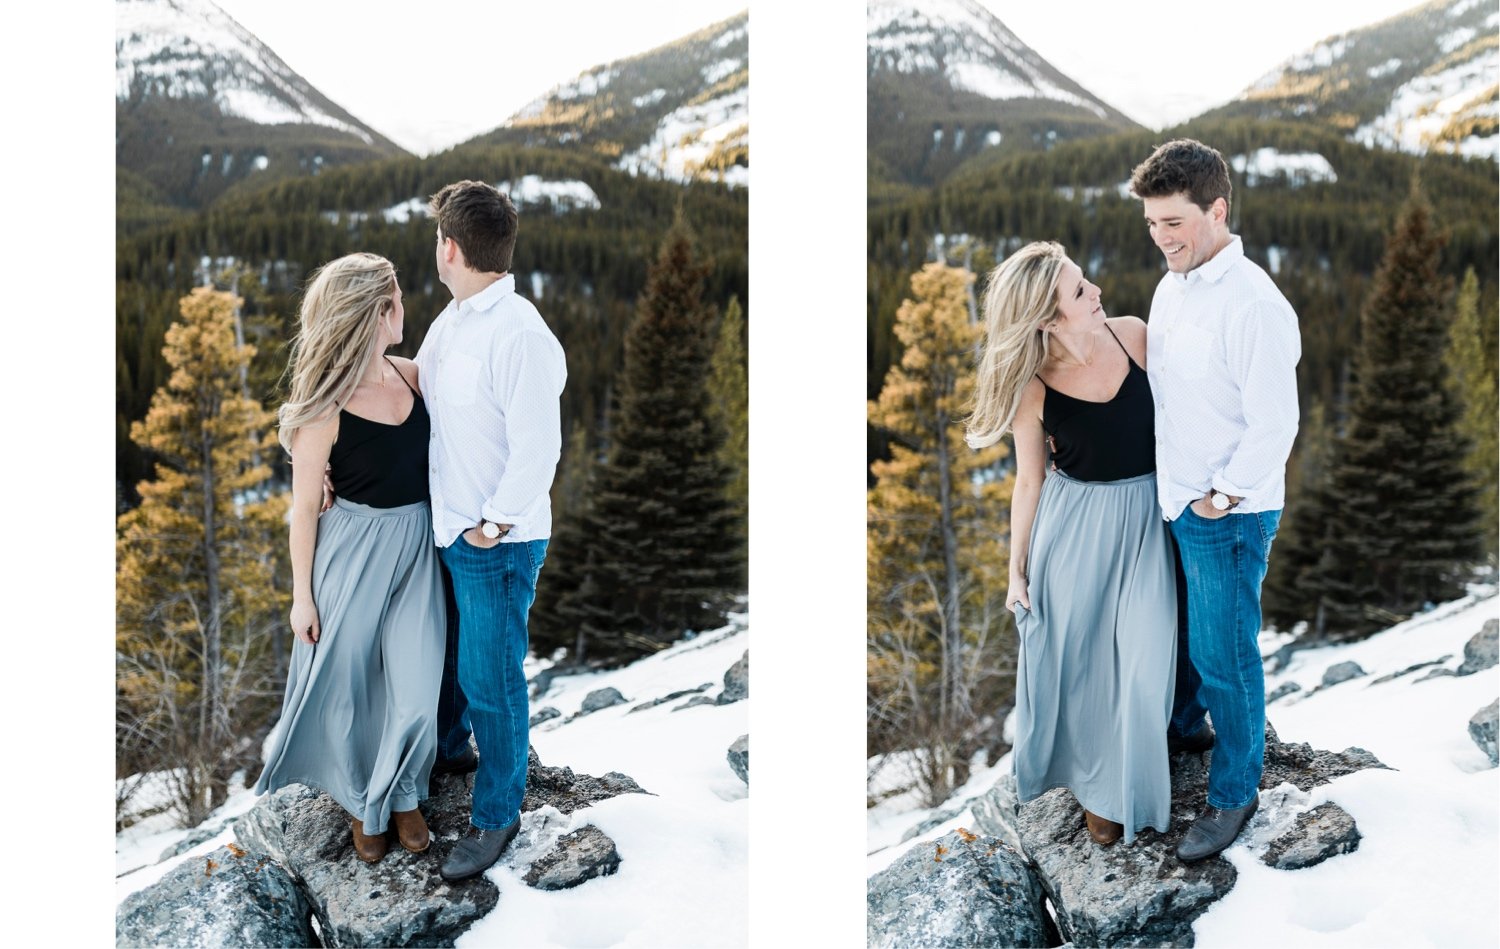 24_sunlight_landscape_Kananaskis_Canmore_Banff_trees_couple_engagement_close_simple_dog_cuddle_kiss_golden_hour_intimate_nature_mountains_fiancee_spring_winter_delicate_ice_bride_snow_soft_Calgary_Alberta_photographer_forest_groom_outdoor.jpg